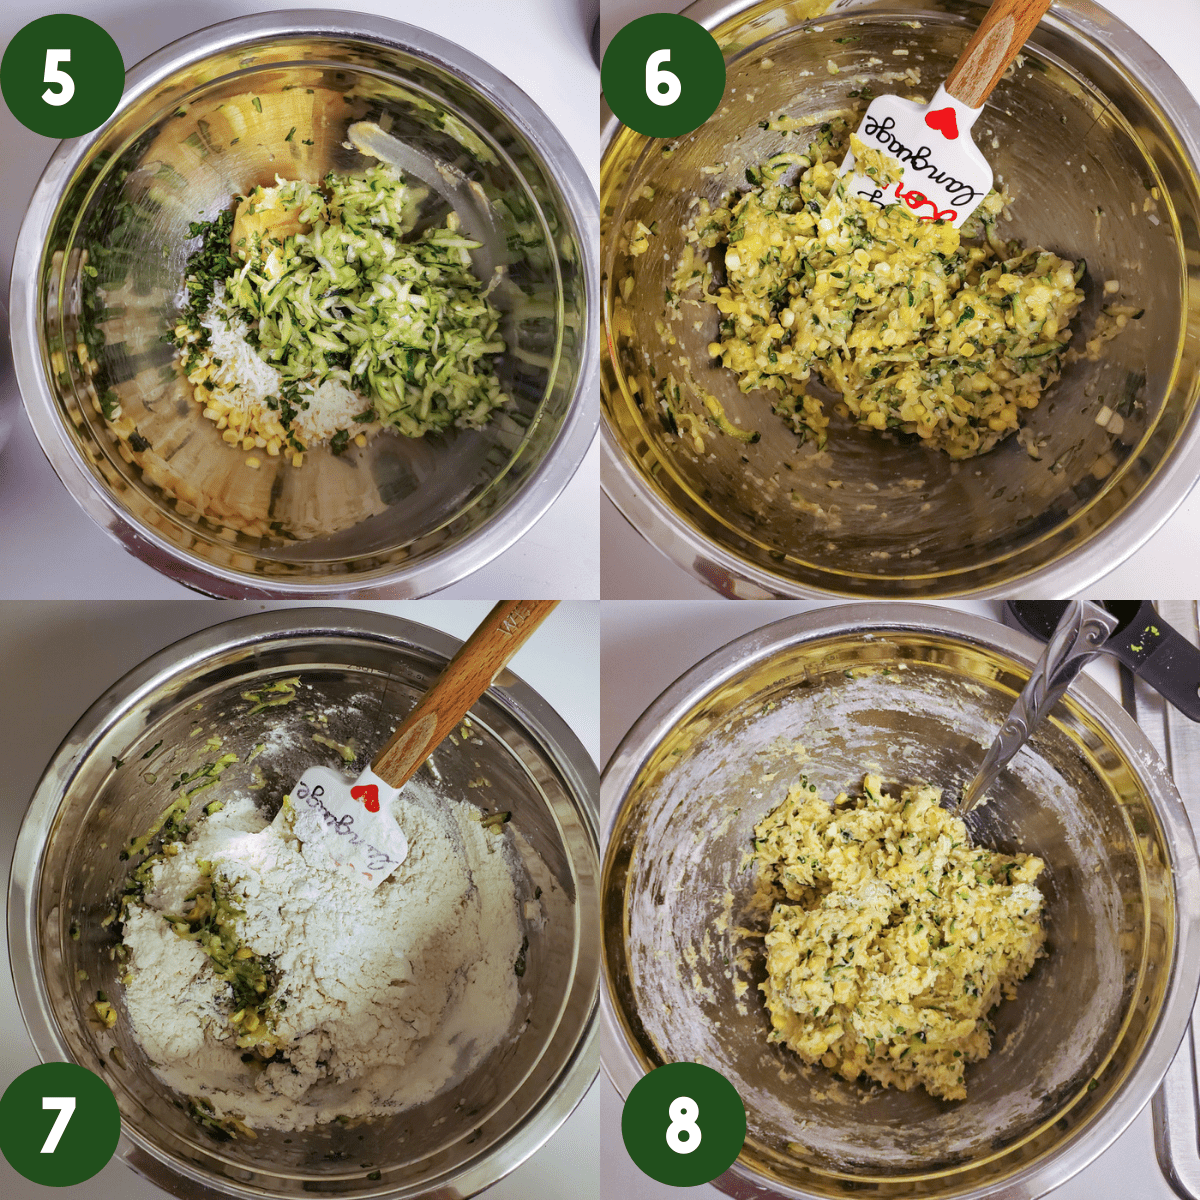 Photo collage of 2 by 2 photos. Step 5) Shredded zucchini, corn, miso, egg, basil and cheese in a metal mixing bowl. Step 6) All previous mentioned ingredients mixed together in metal mixing bowl. Step 7) Baking powder and flour sprinkled over mixed ingredients in metal mixing bowl. Step 8) All ingredients mixed together in metal mixing bowl.